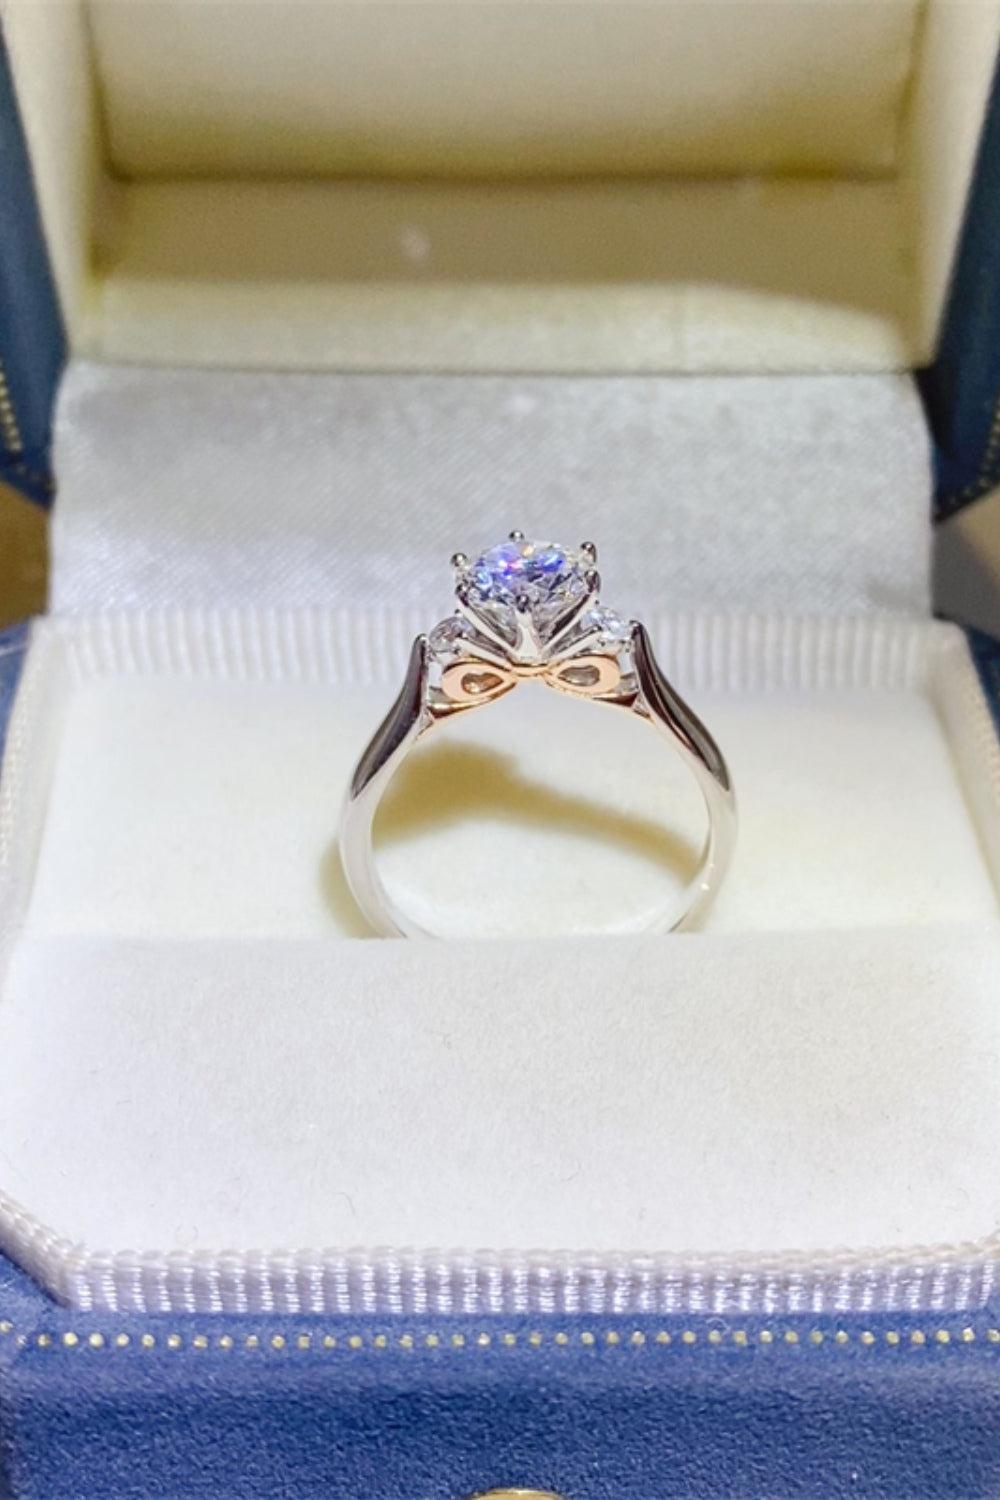 a ring in a blue box with a white diamond